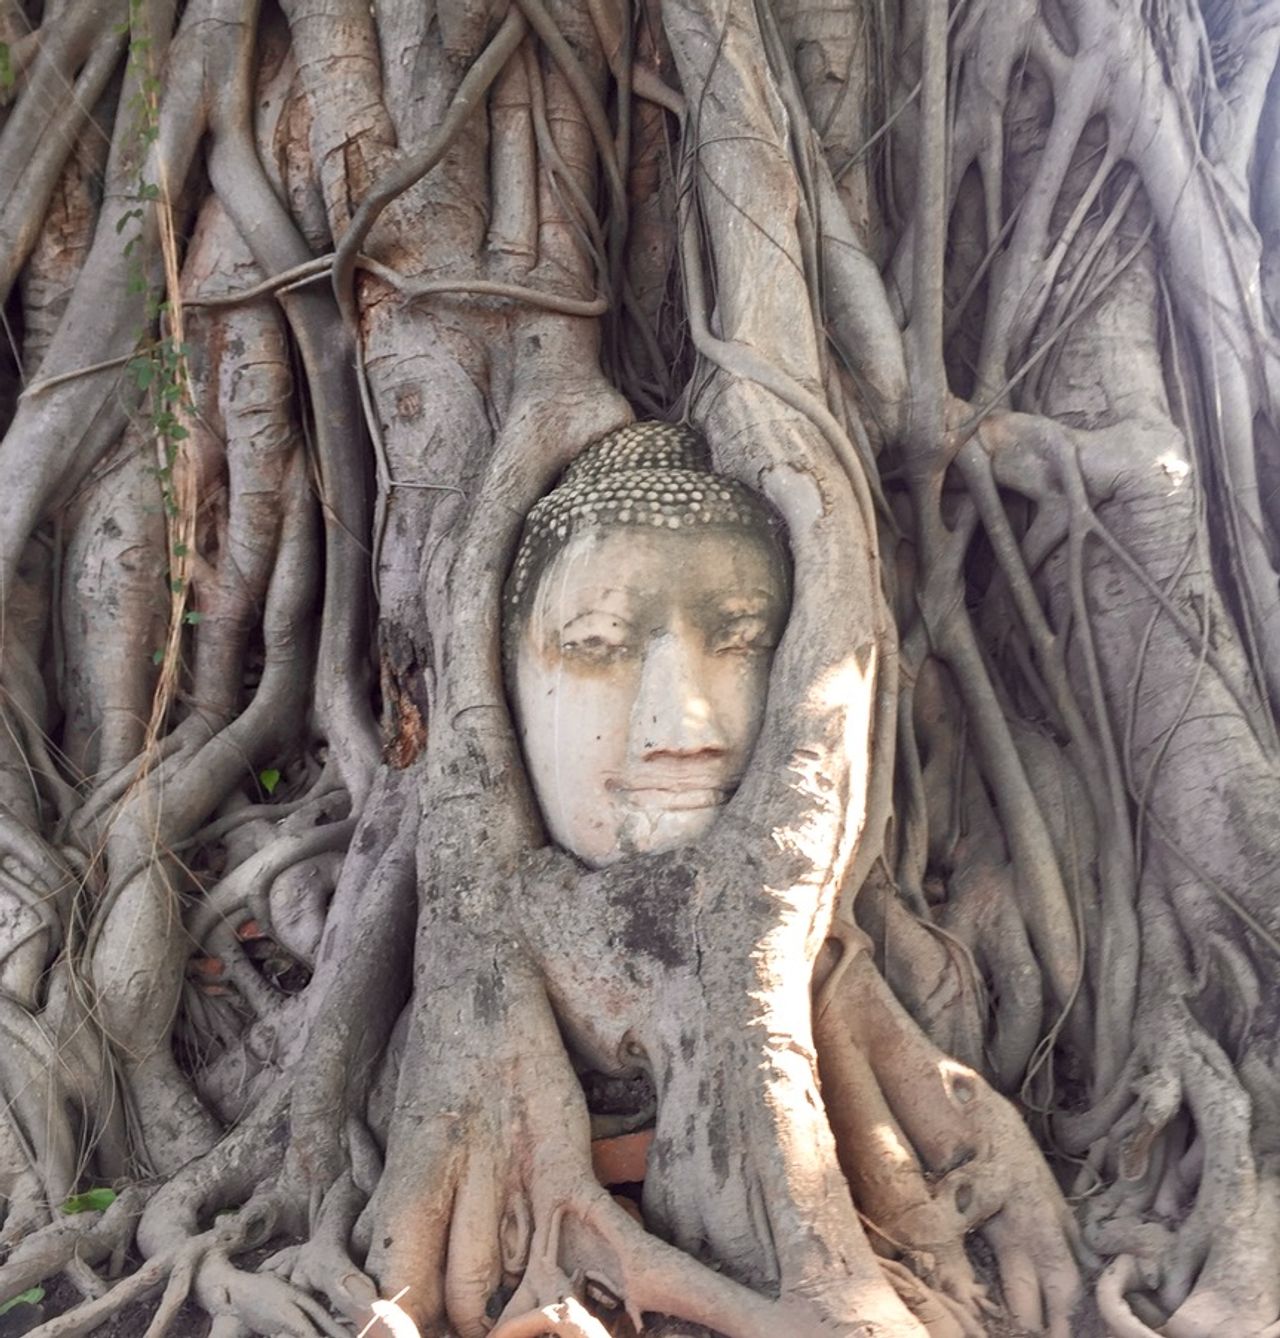 A stone Buddha head with trees growing around it.